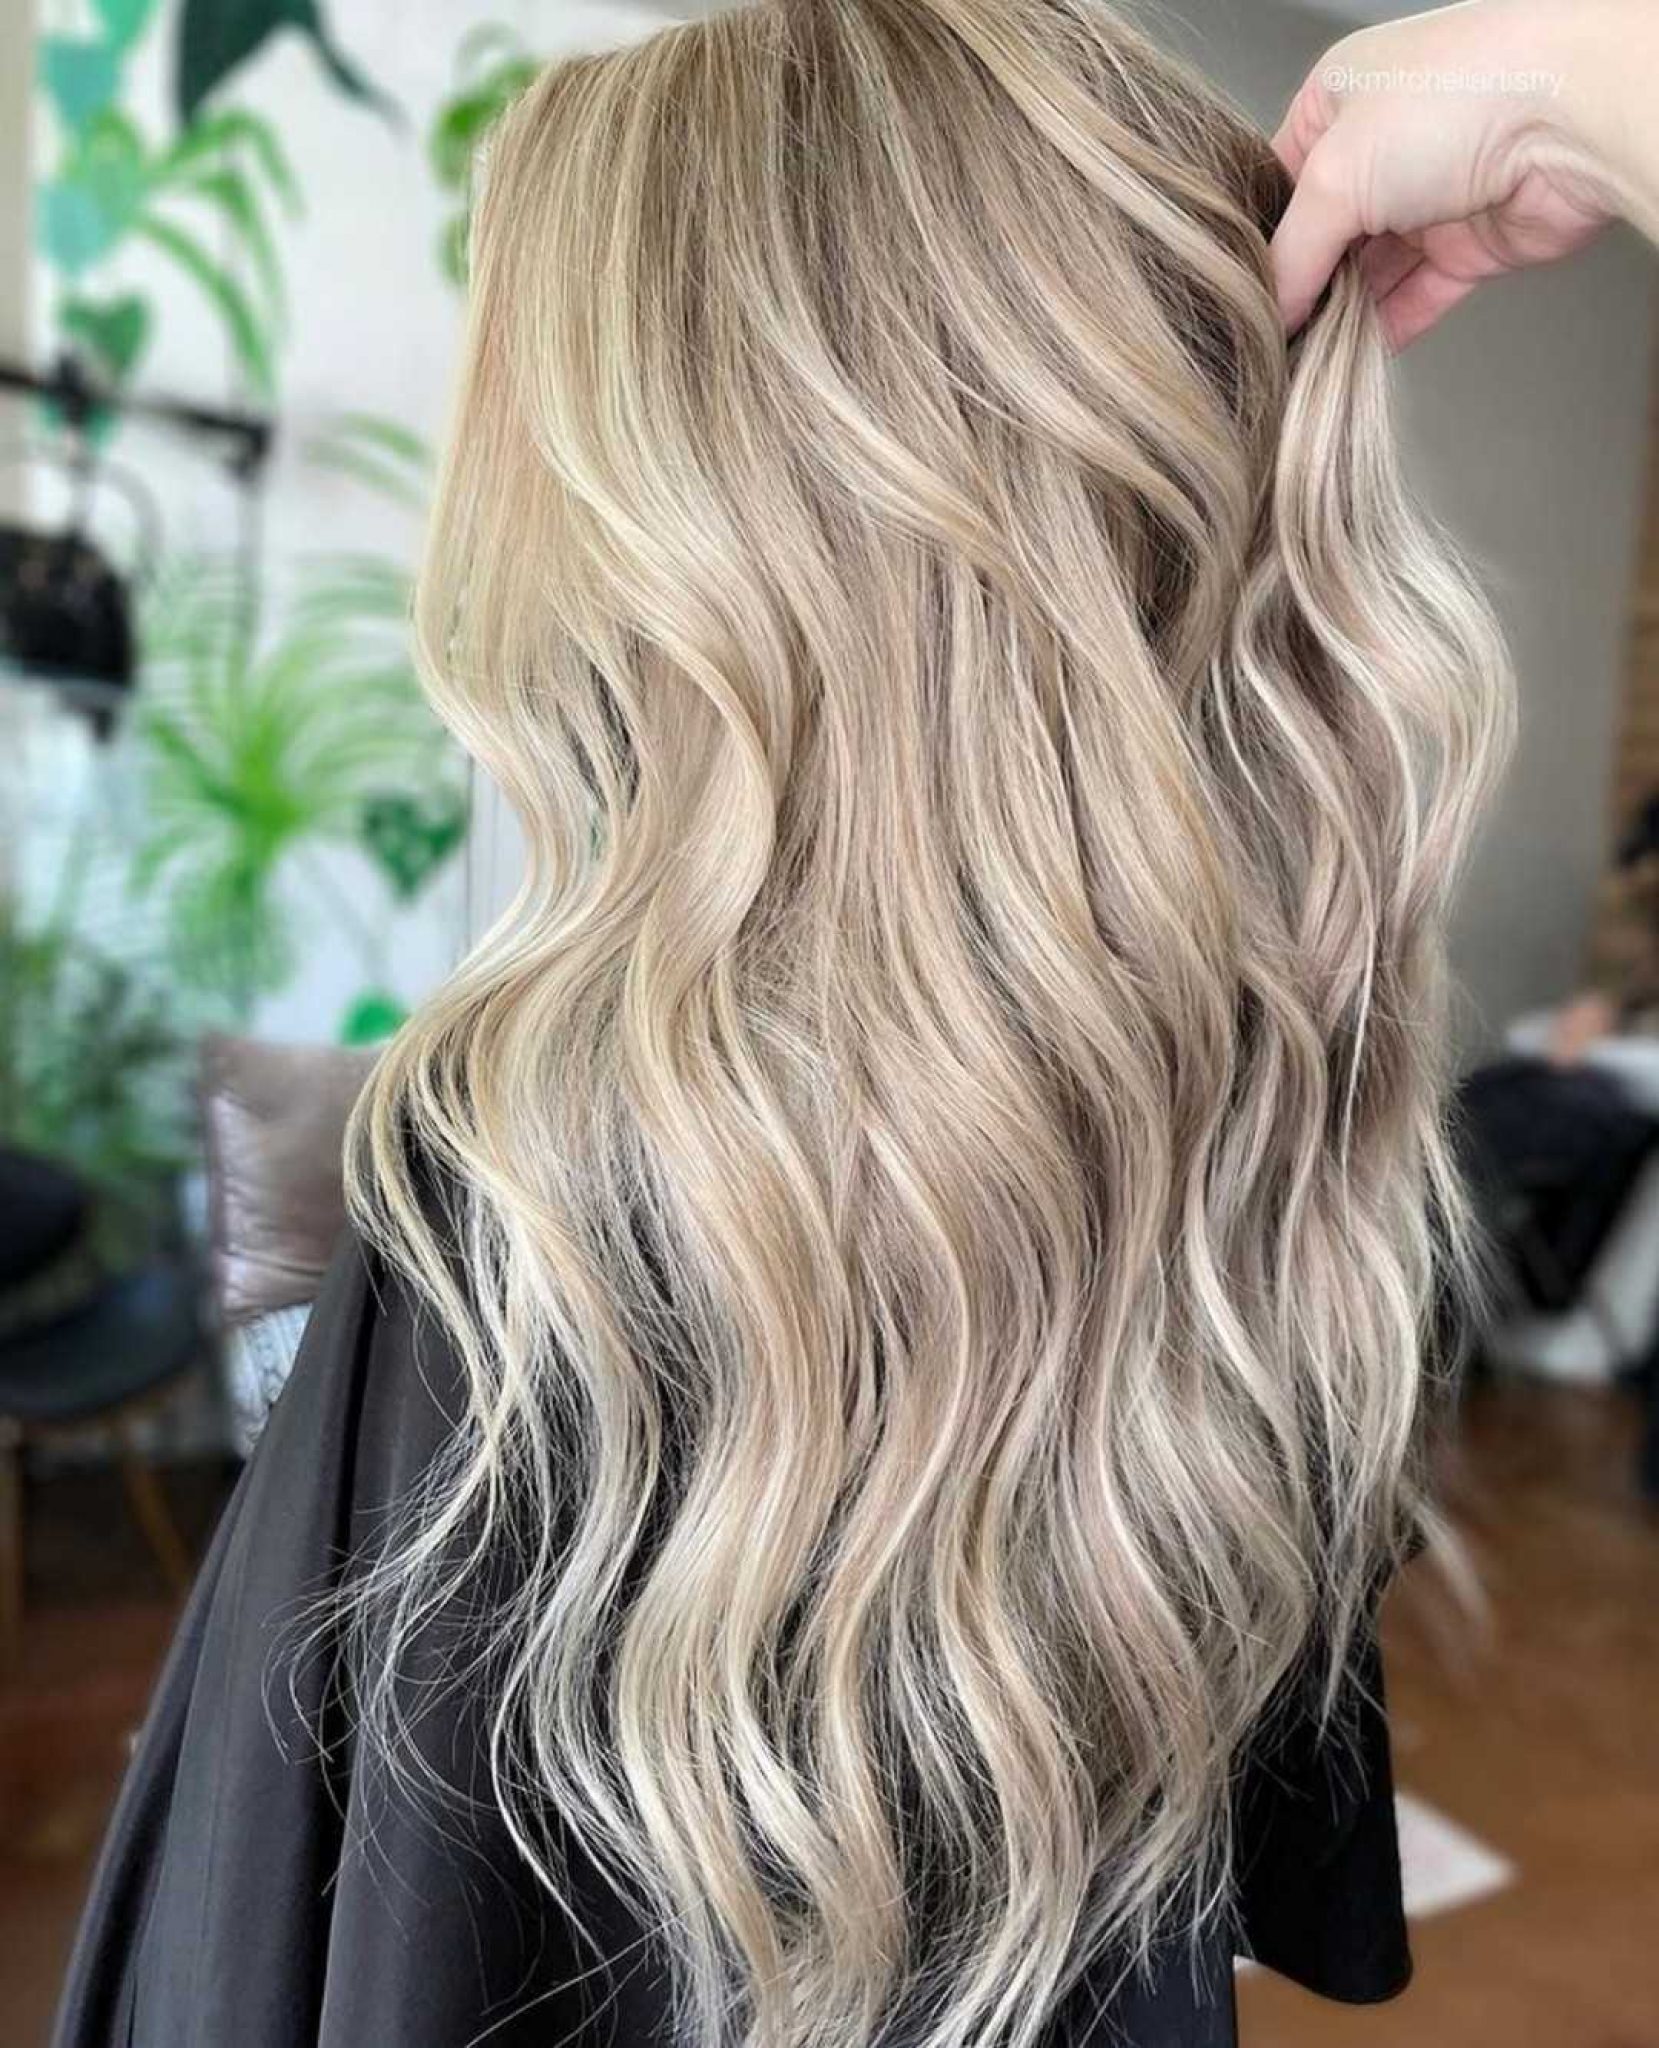 Does Purple Shampoo Work on Natural Blonde Hair?